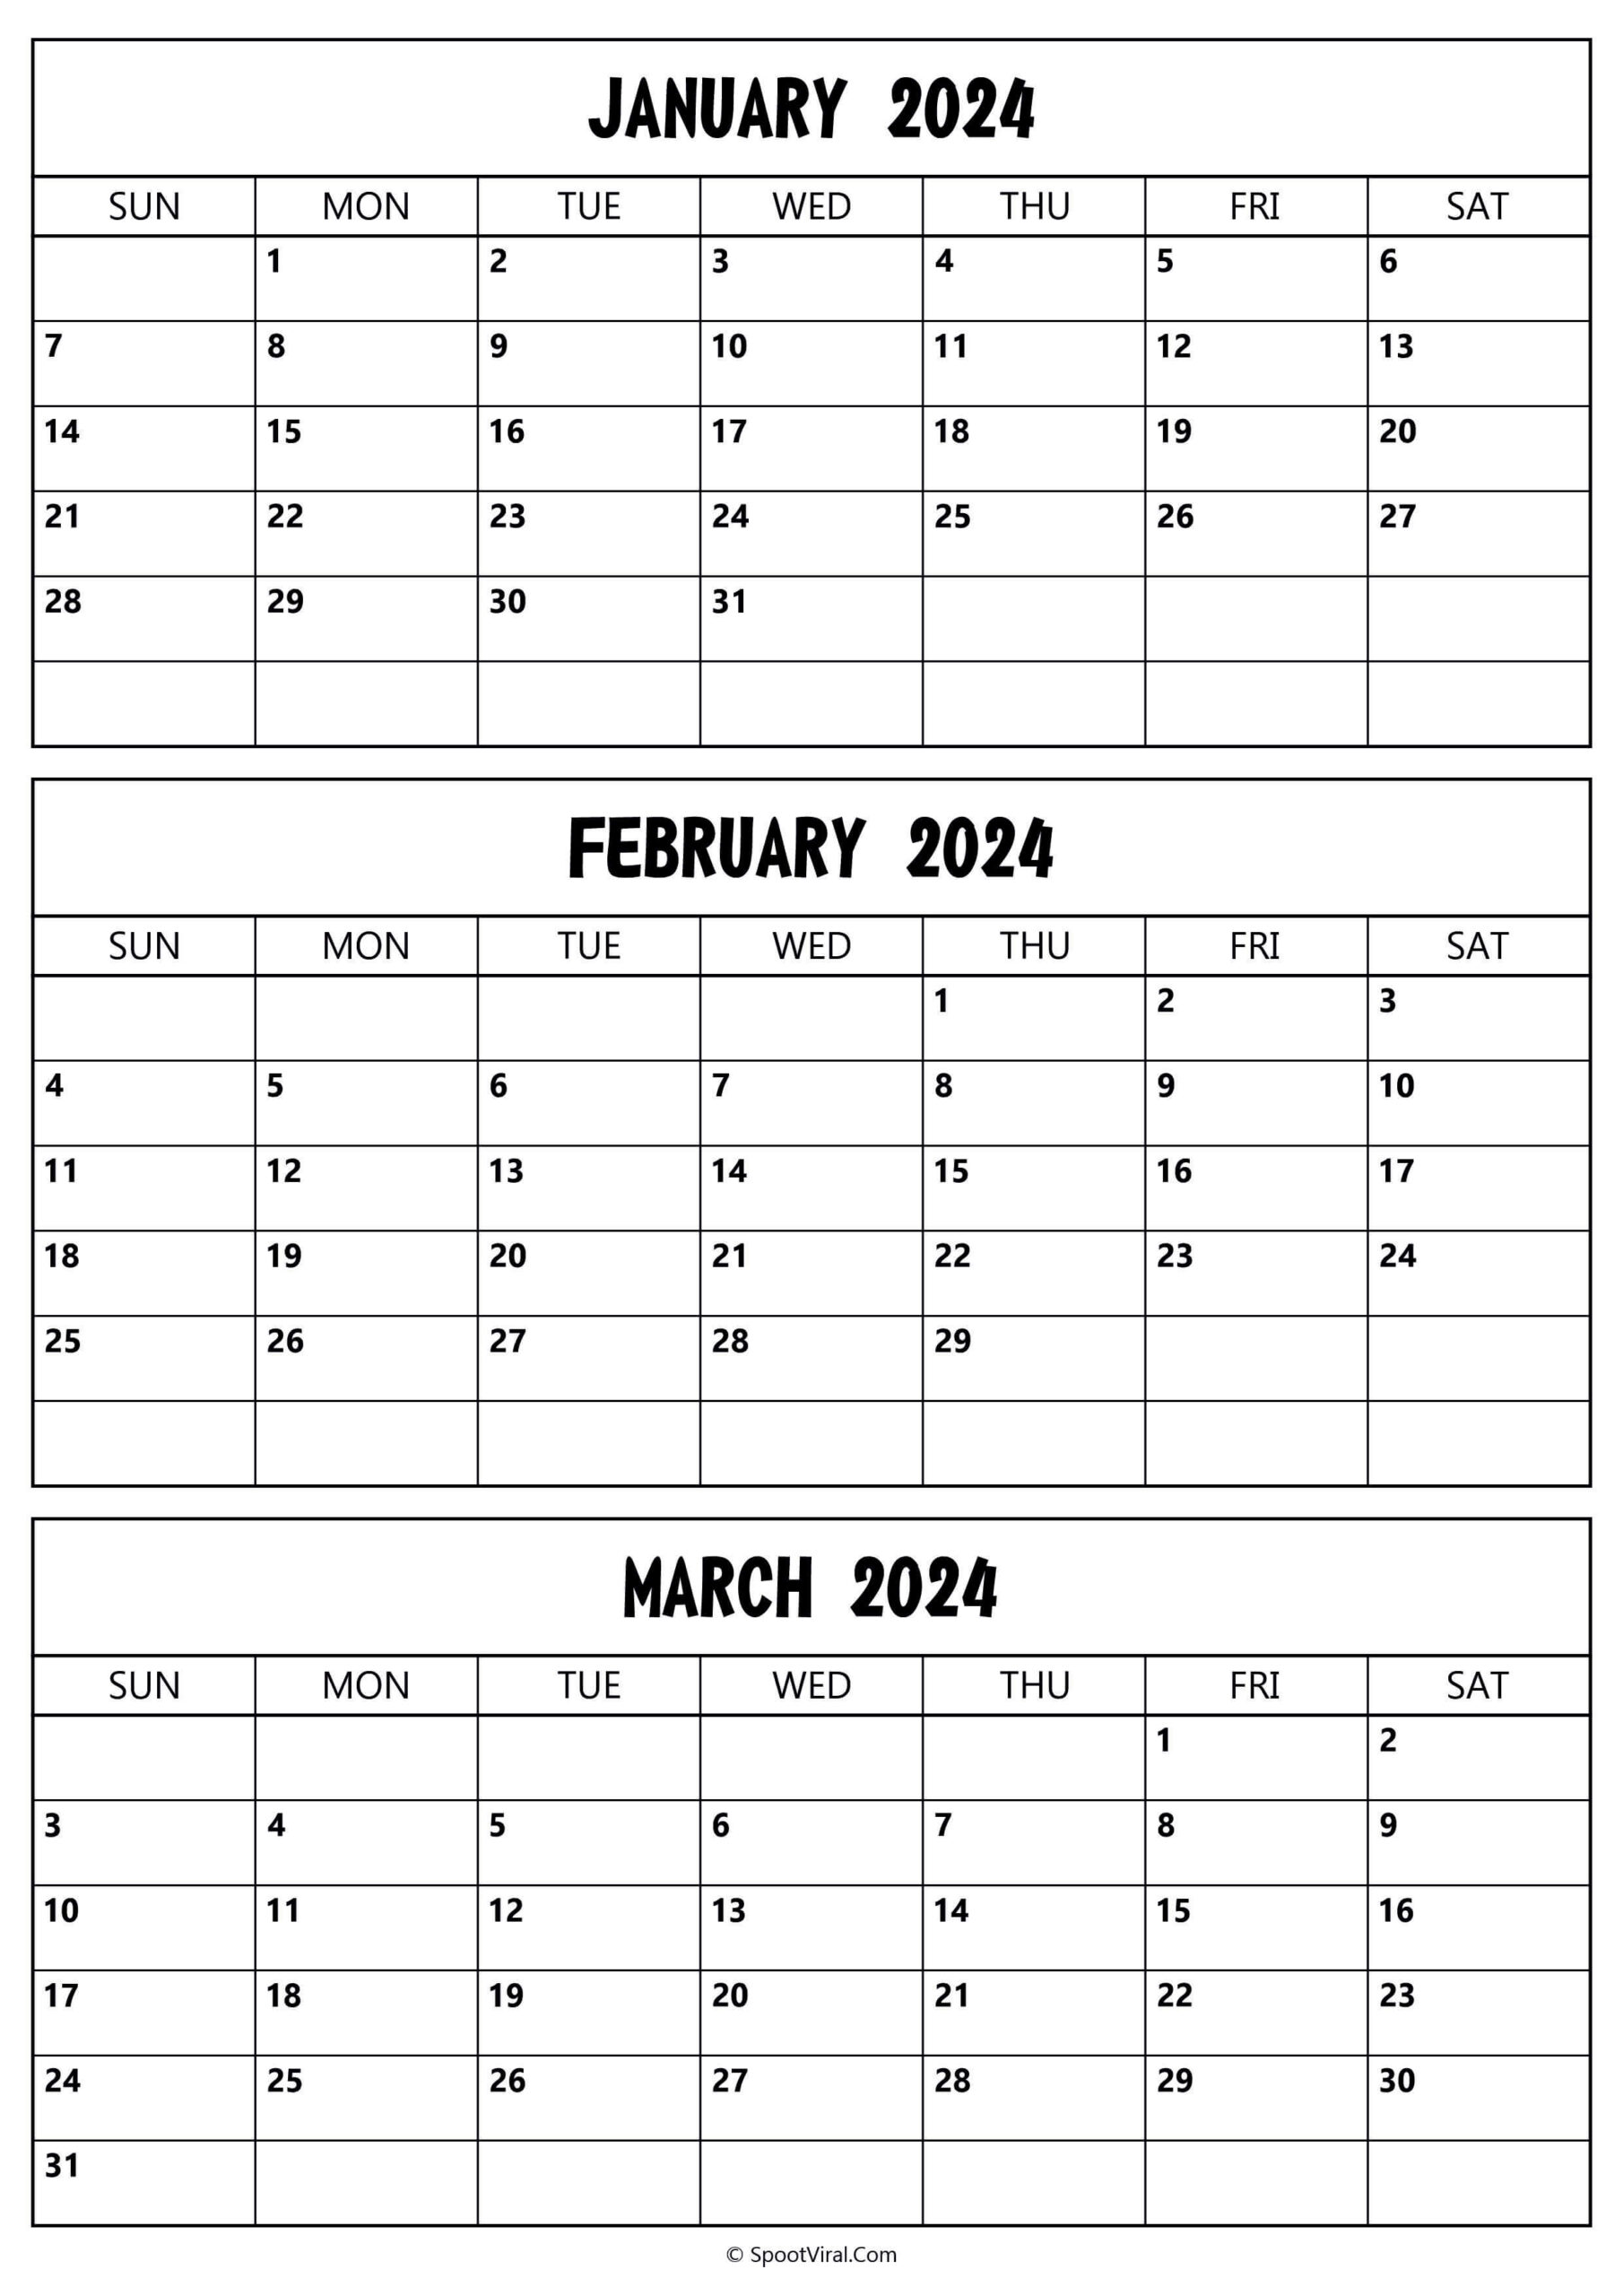 January To March 2024 Calendar Templates - Spootviral | Printable Calendar 2024 January February March